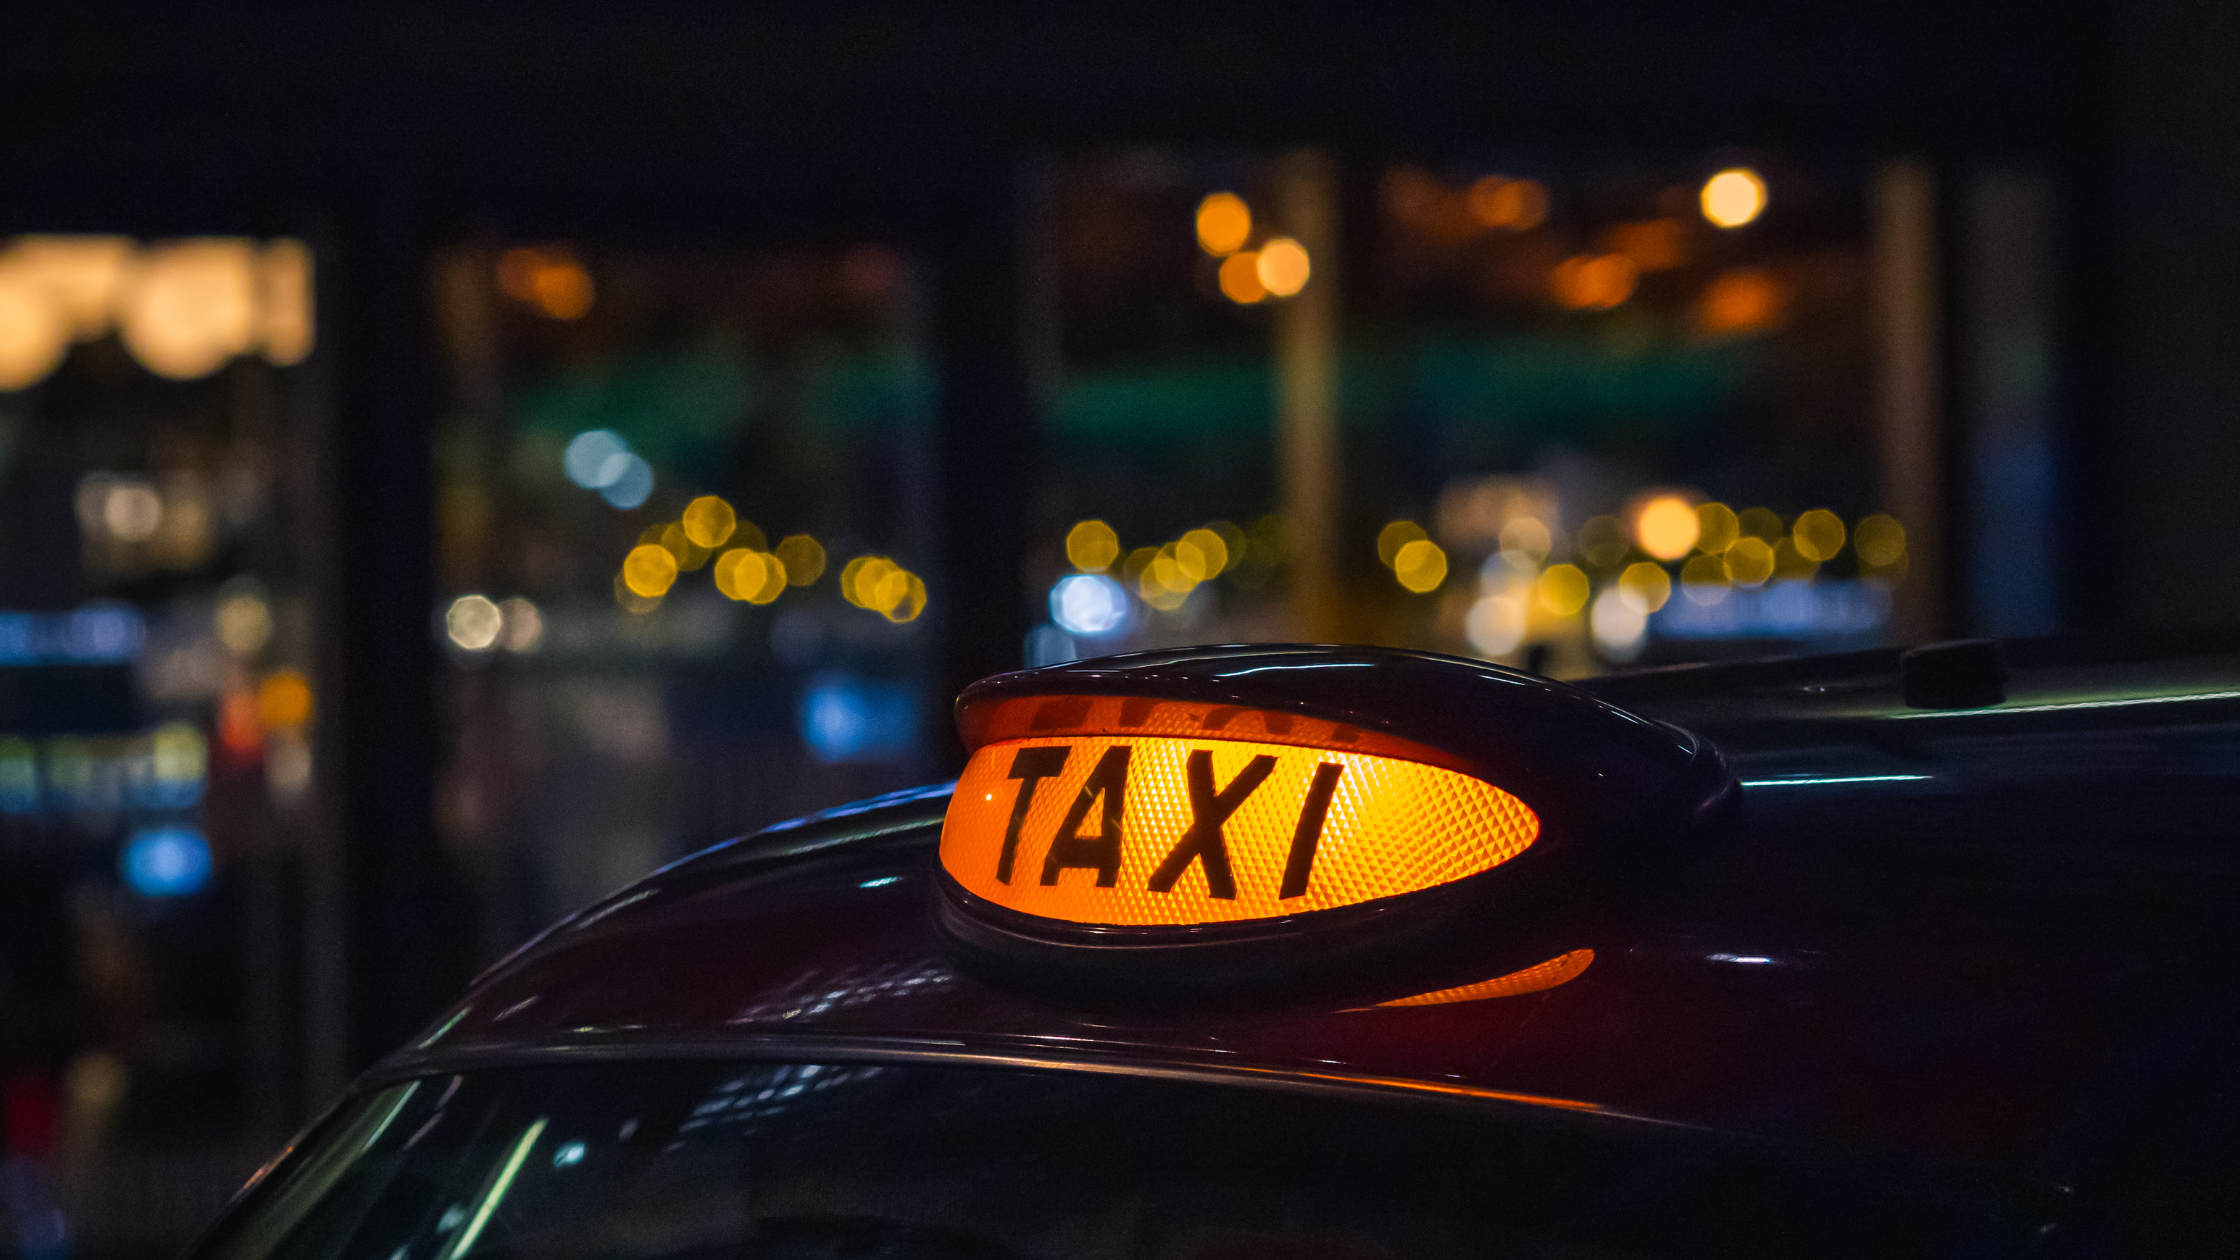 Cab Booking Web and Mobile Applications like Uber and Ola